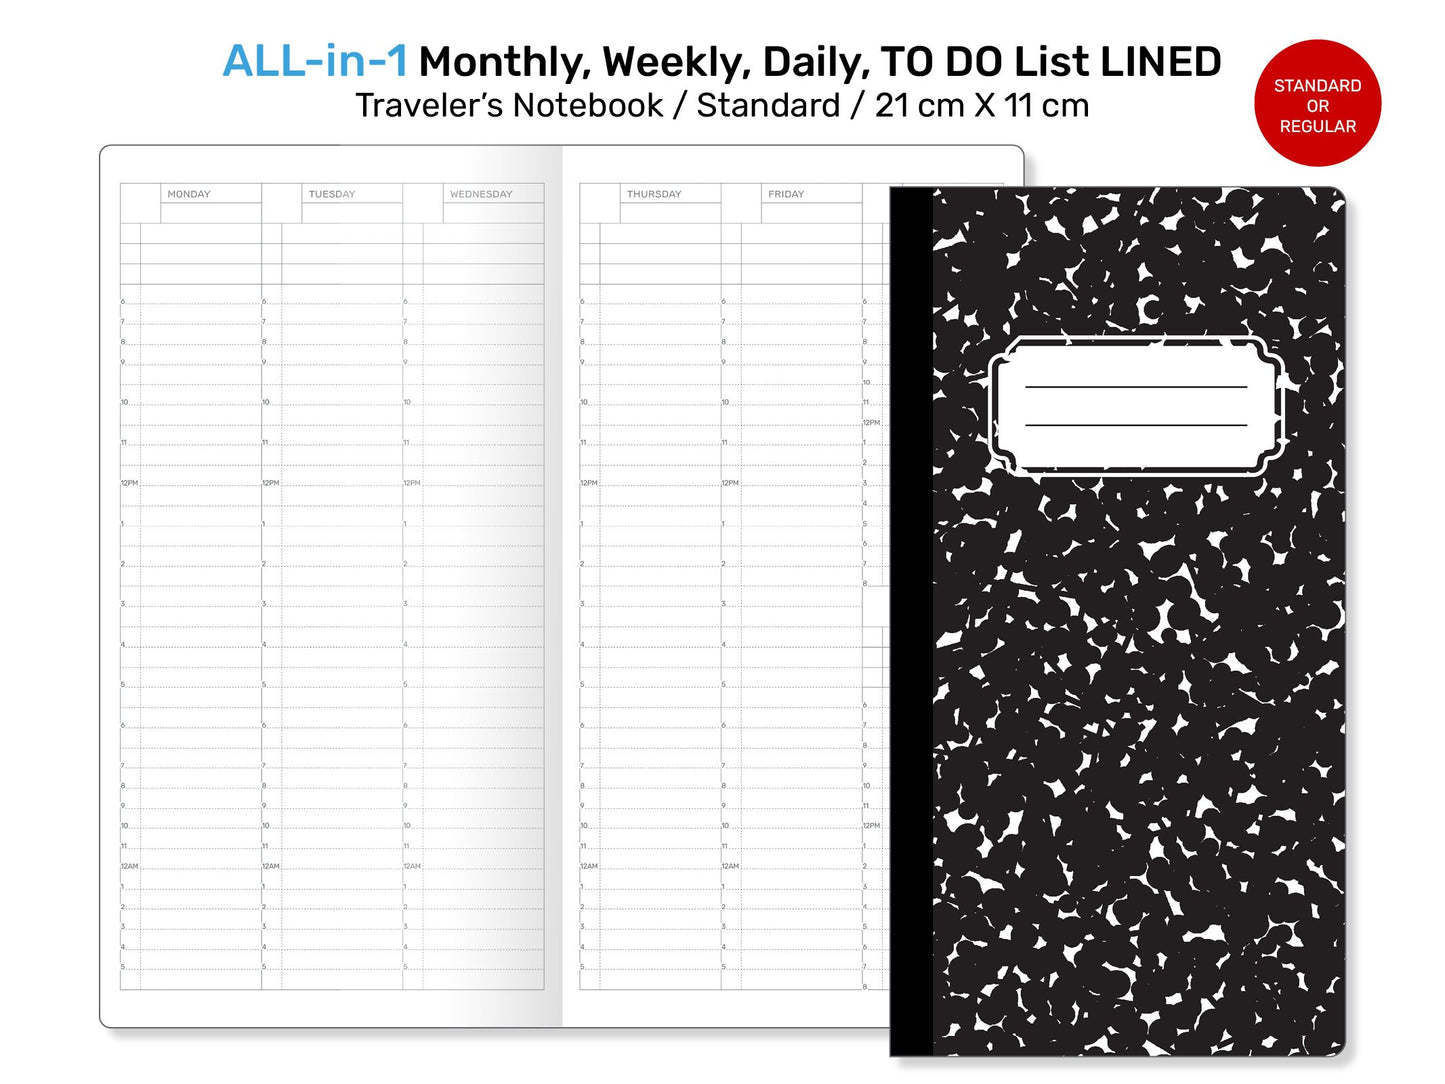 Standard TN ALL-in-1 Monthly, Weekly, Daily, List Printable Traveler's Notebook Refill Insert LINED - Minimalist Functional RTN022-003B